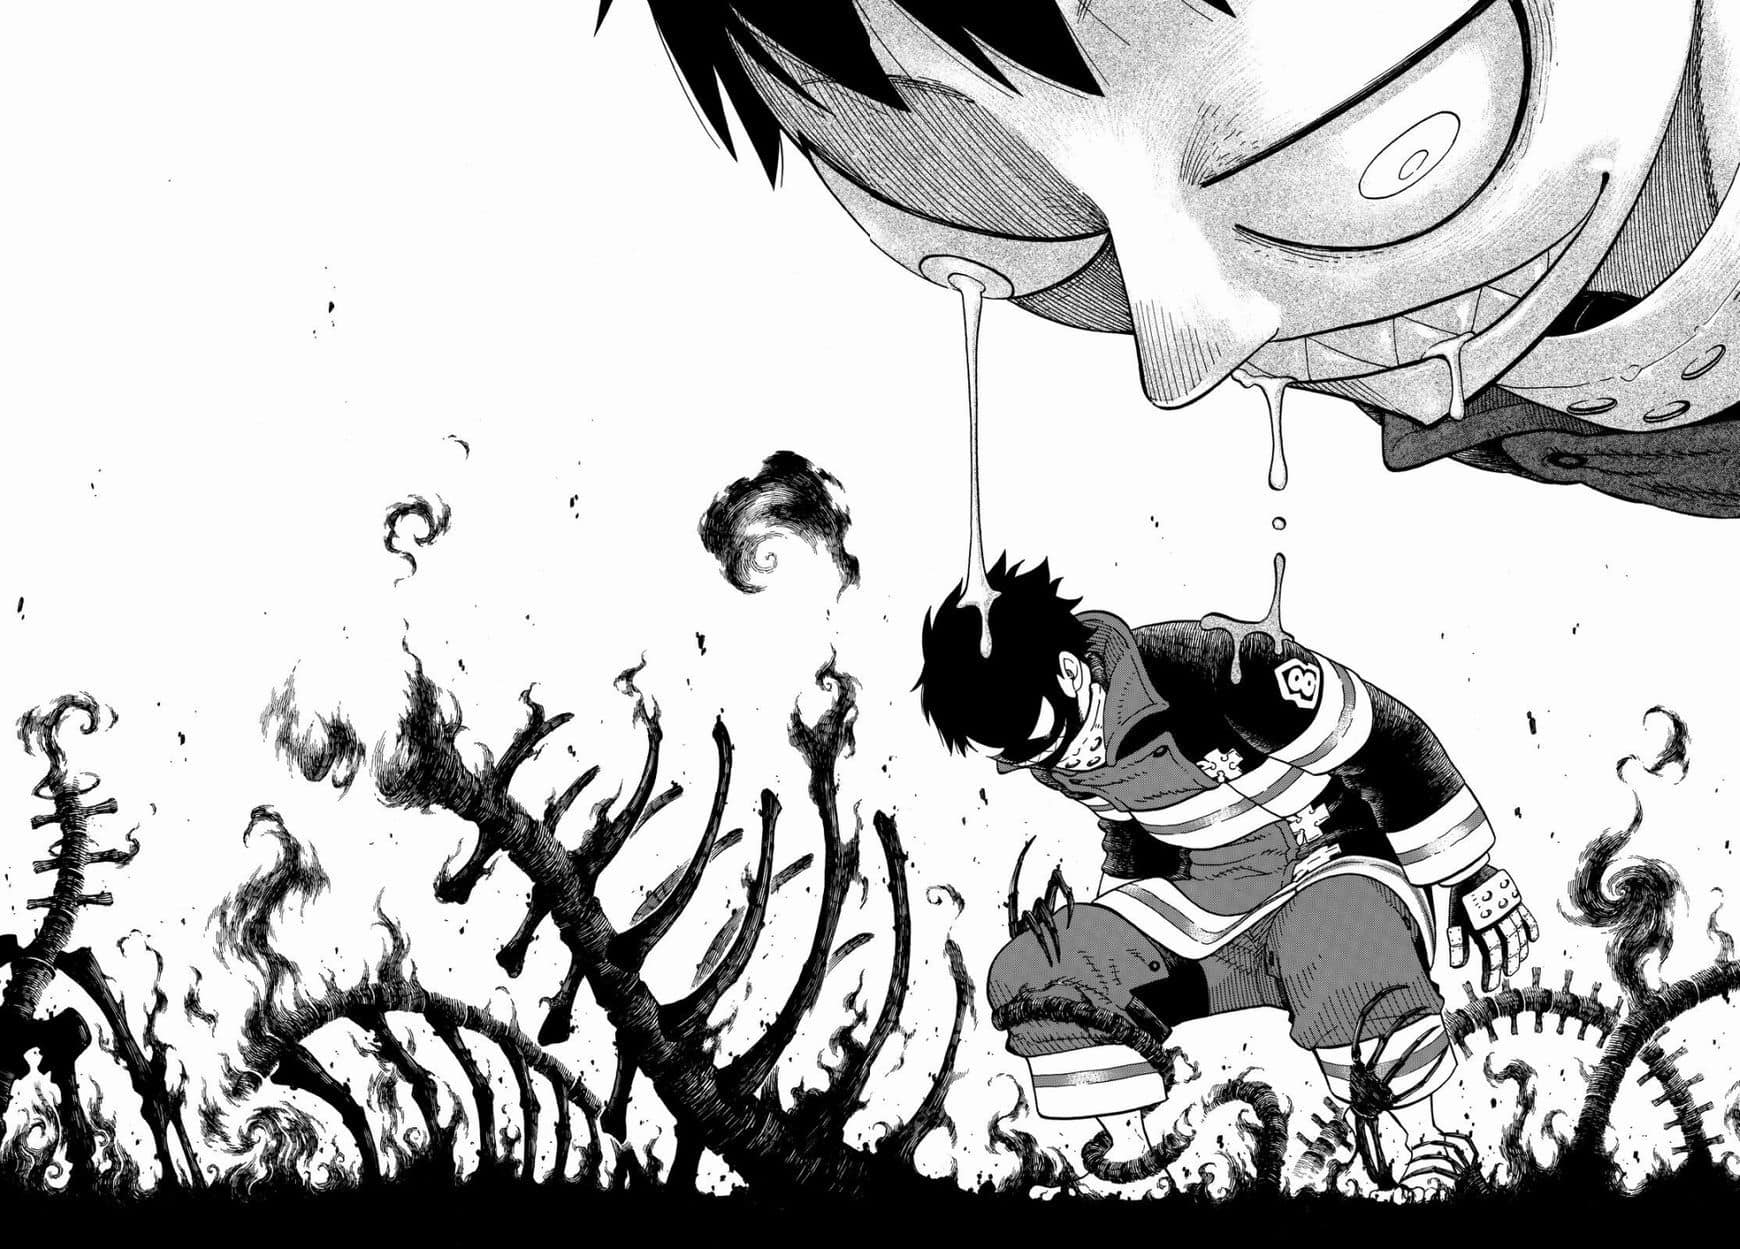 Anime News And Facts on X: Fire Force author says the manga's